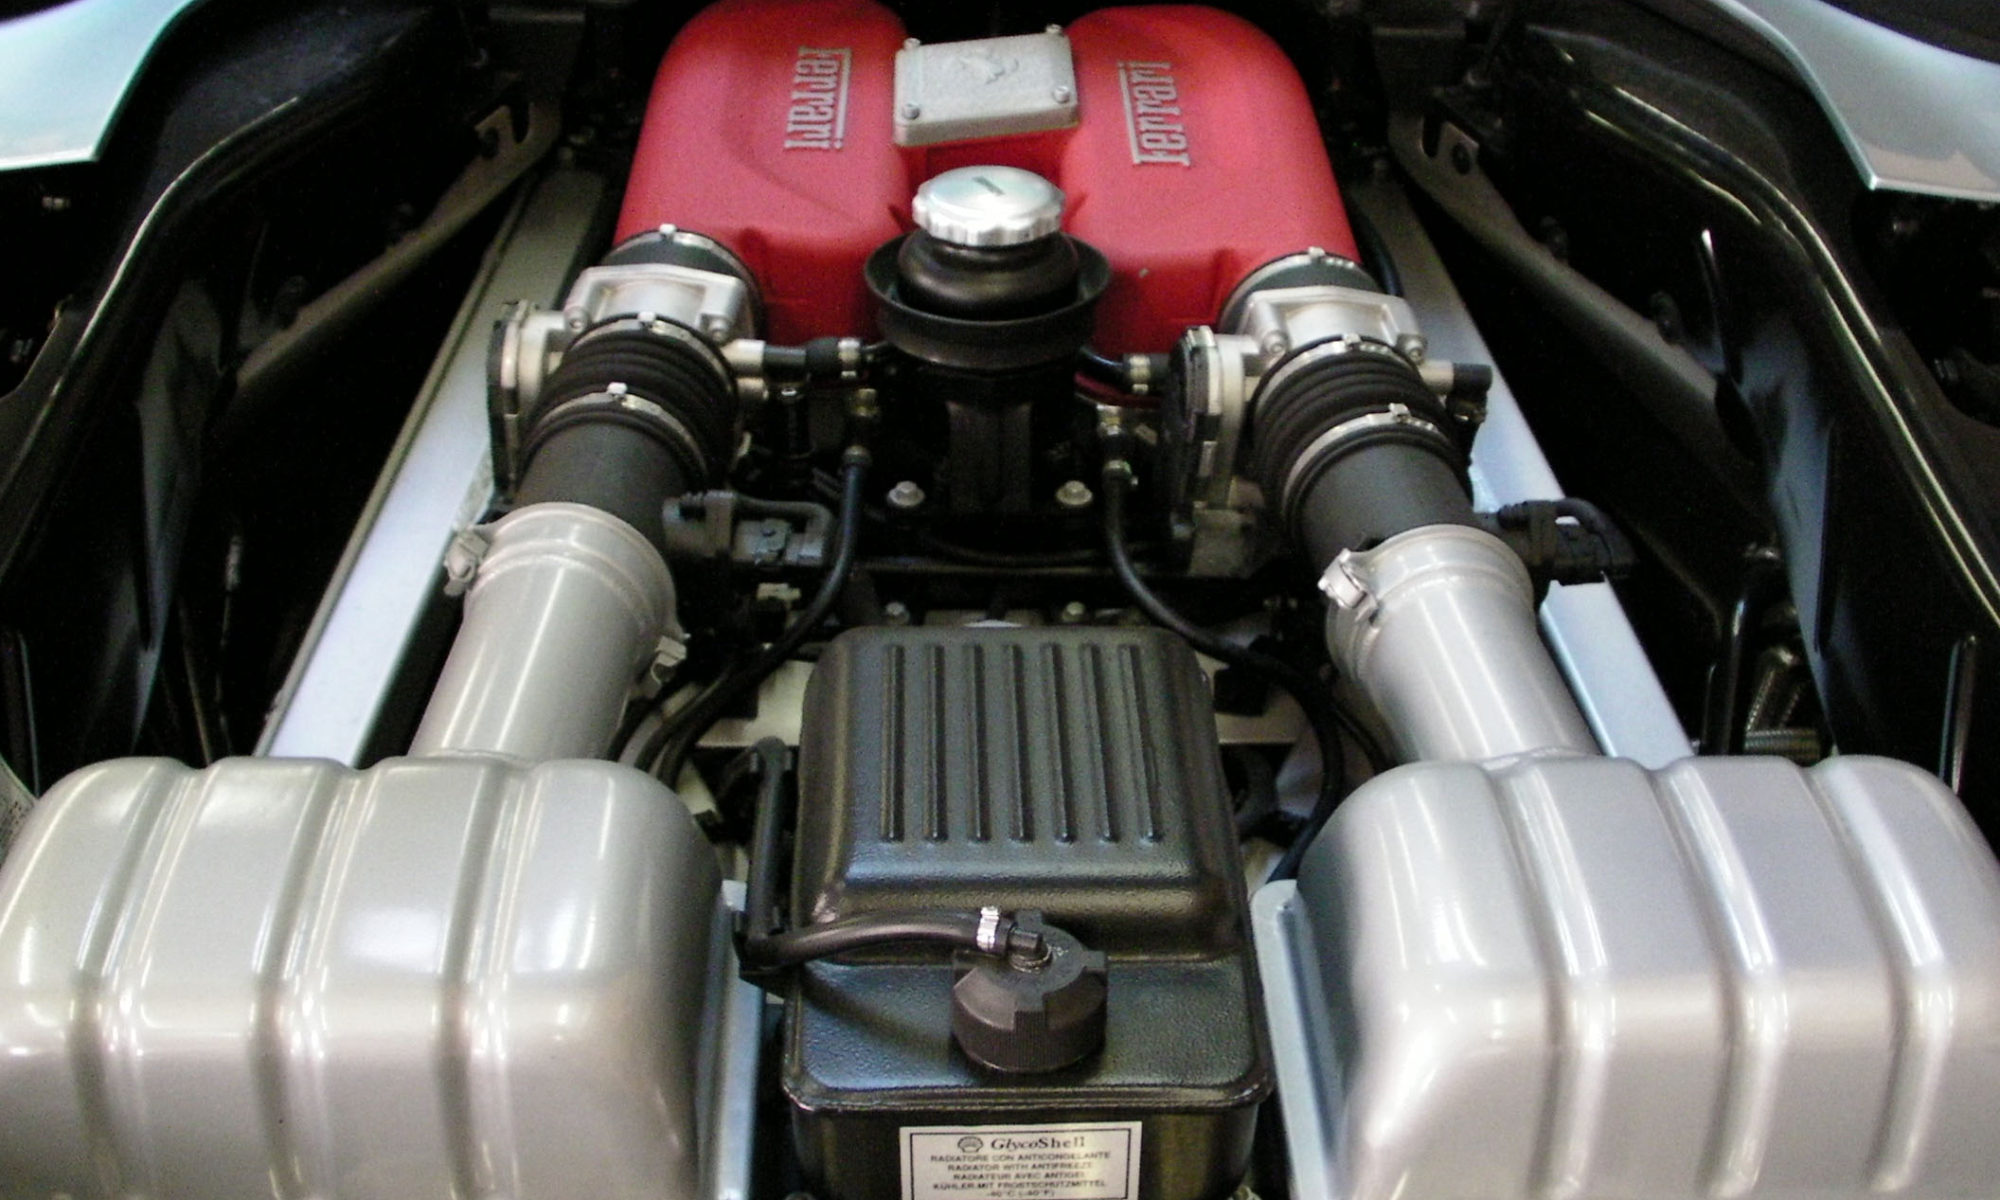 Ferrari F360. Services: Color coated air intake with K&N filter upgrade.